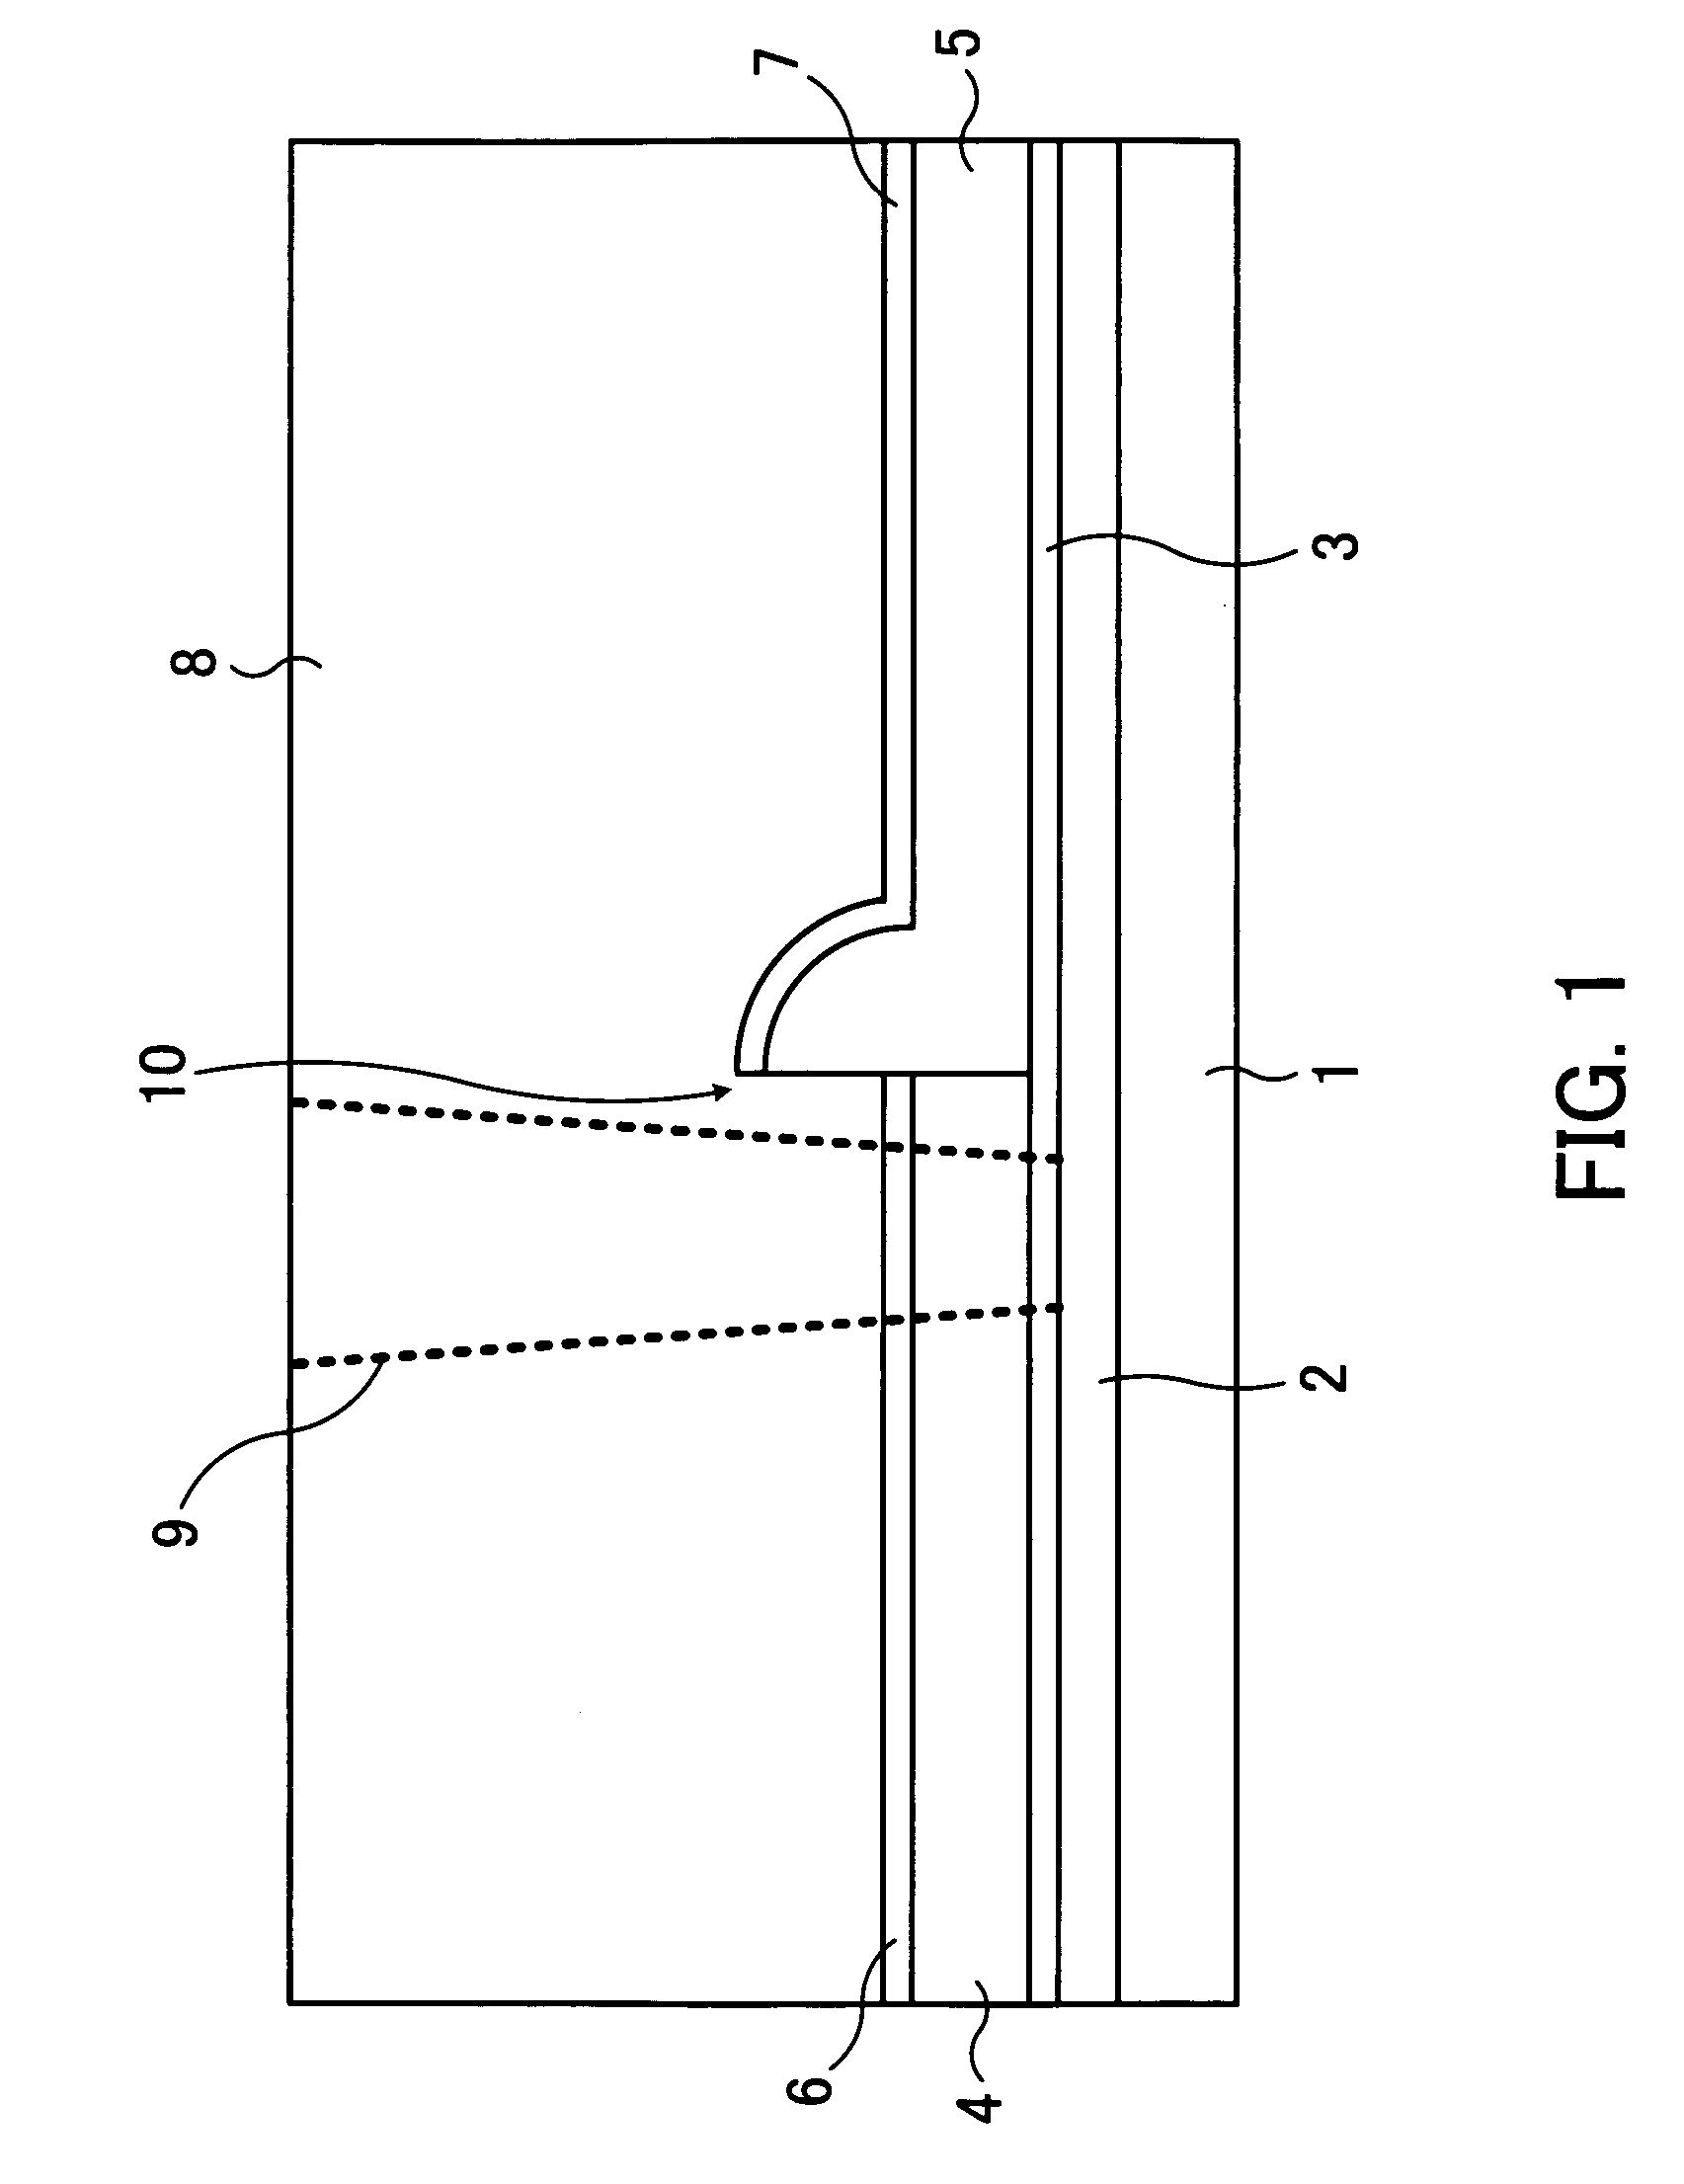 Semiconductor device and process for producing the same